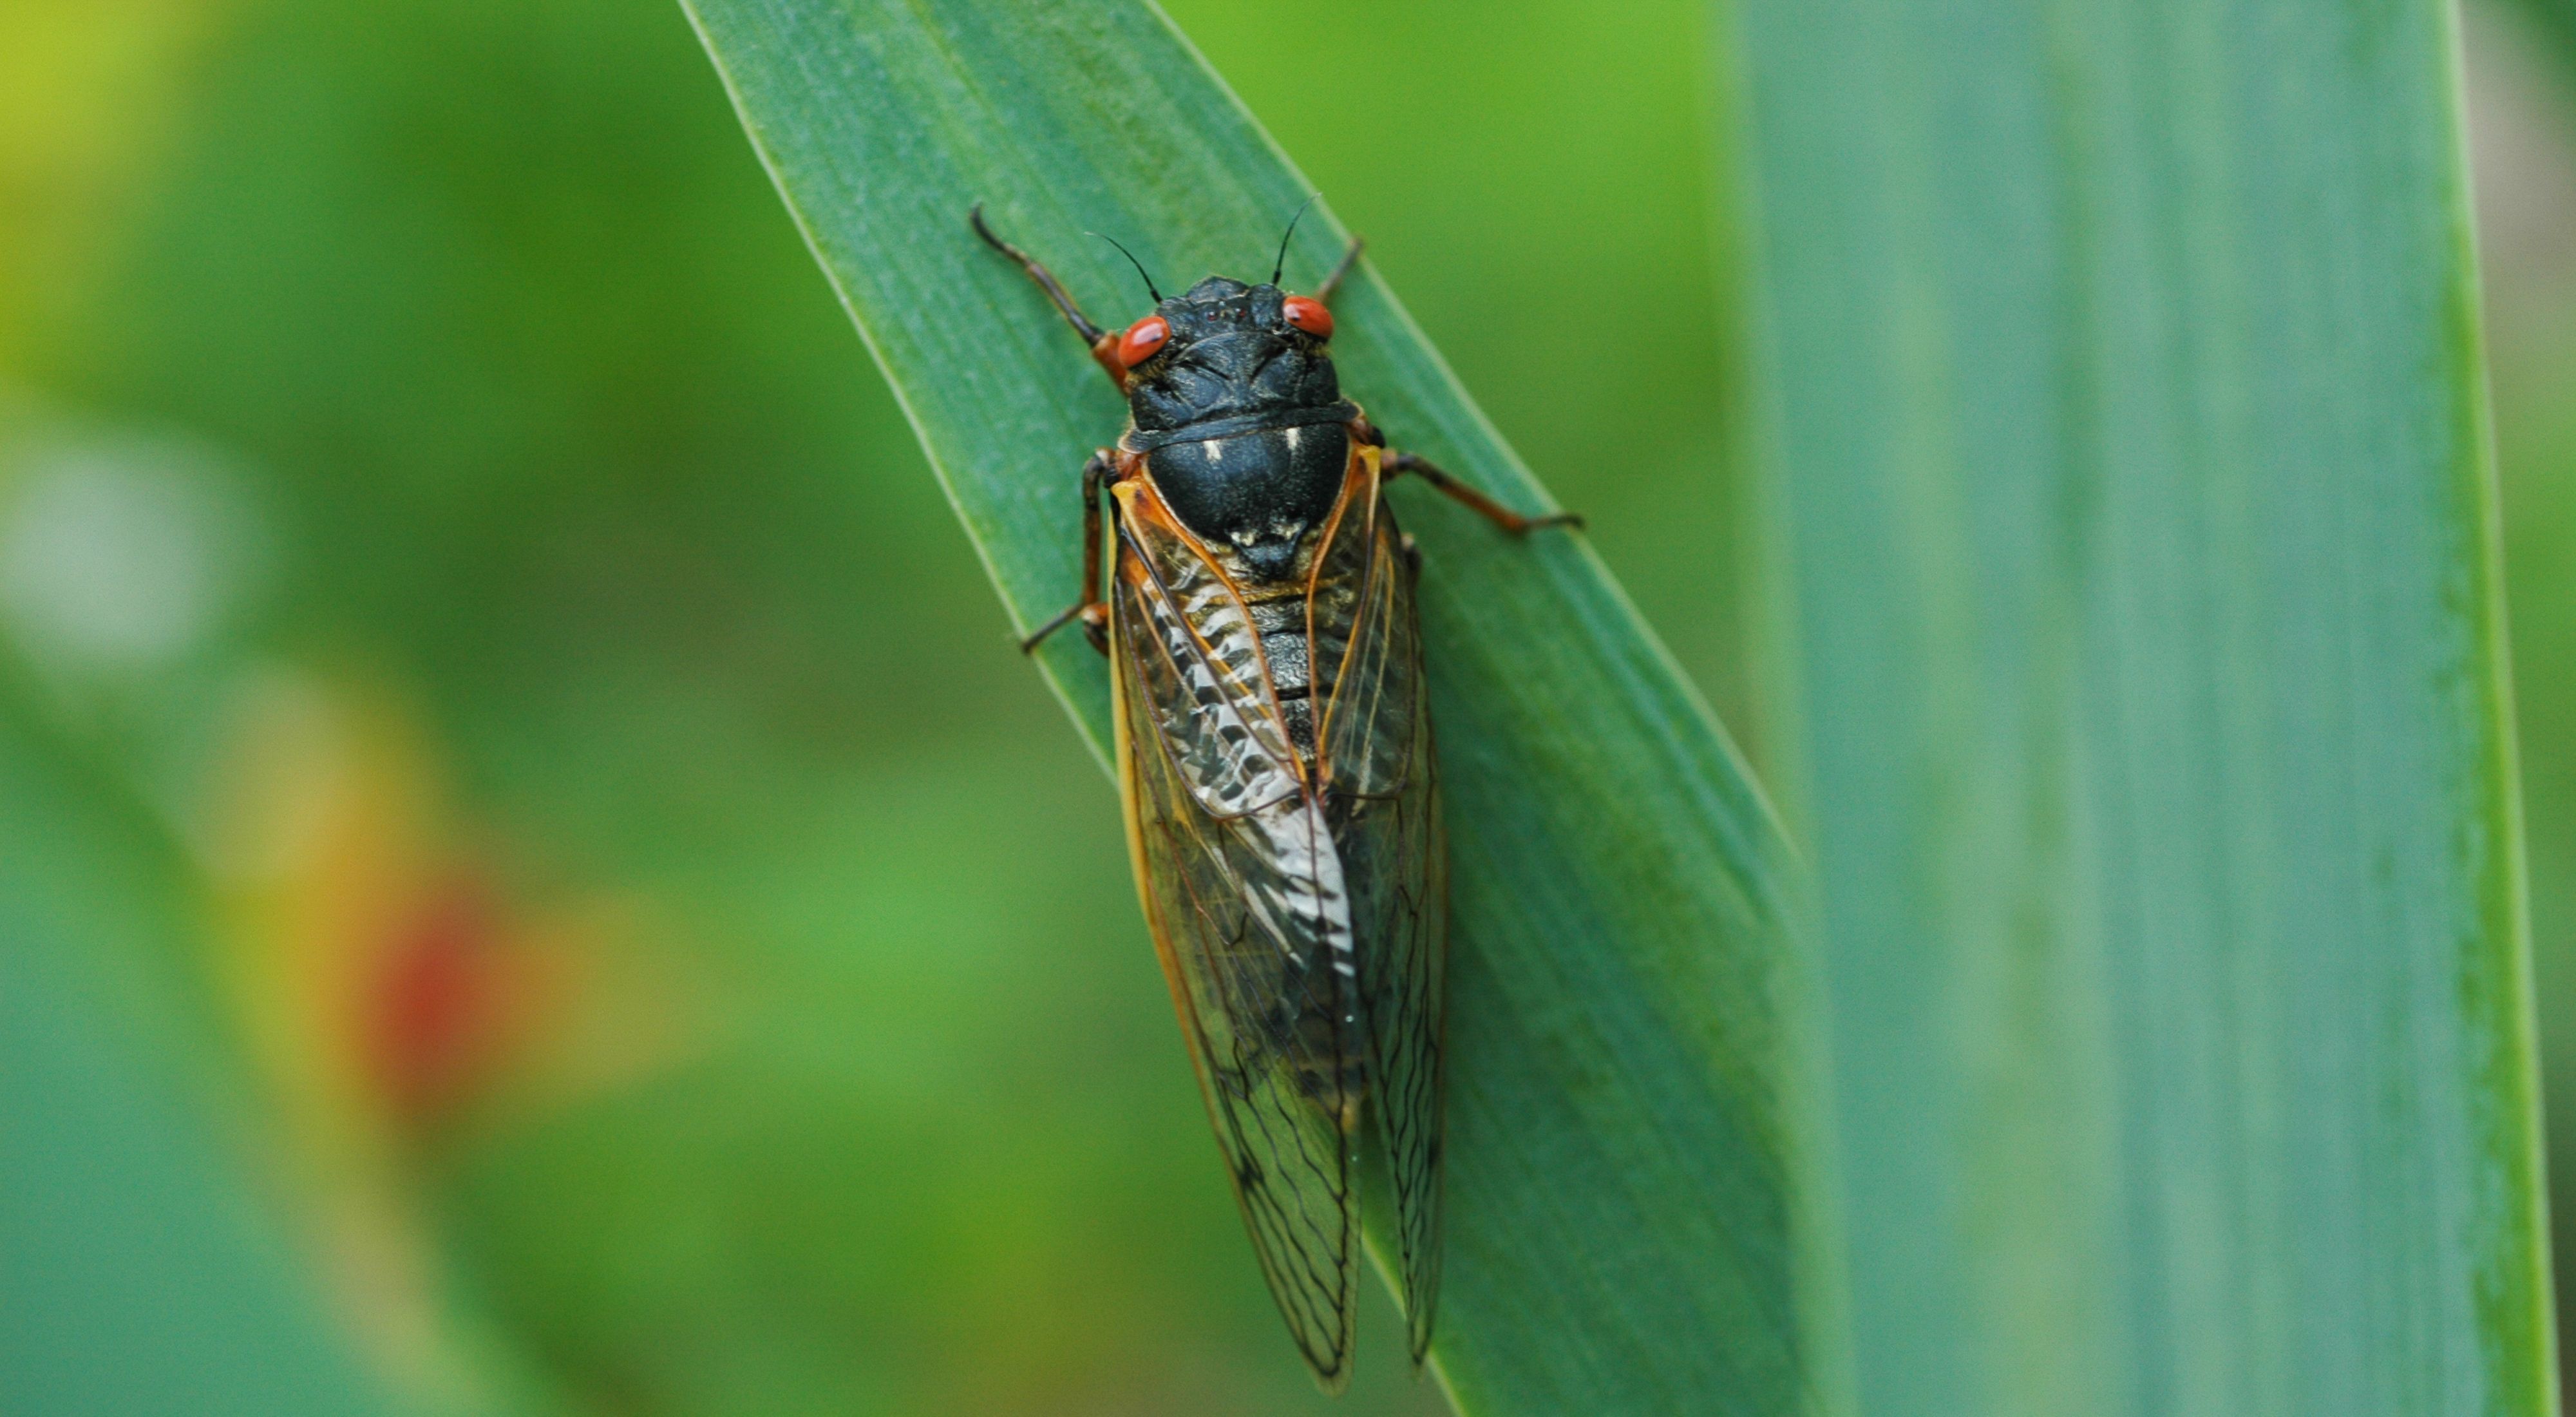 A cicada (a black insect with transparent wings and large red eyes) sits on a green leaf.